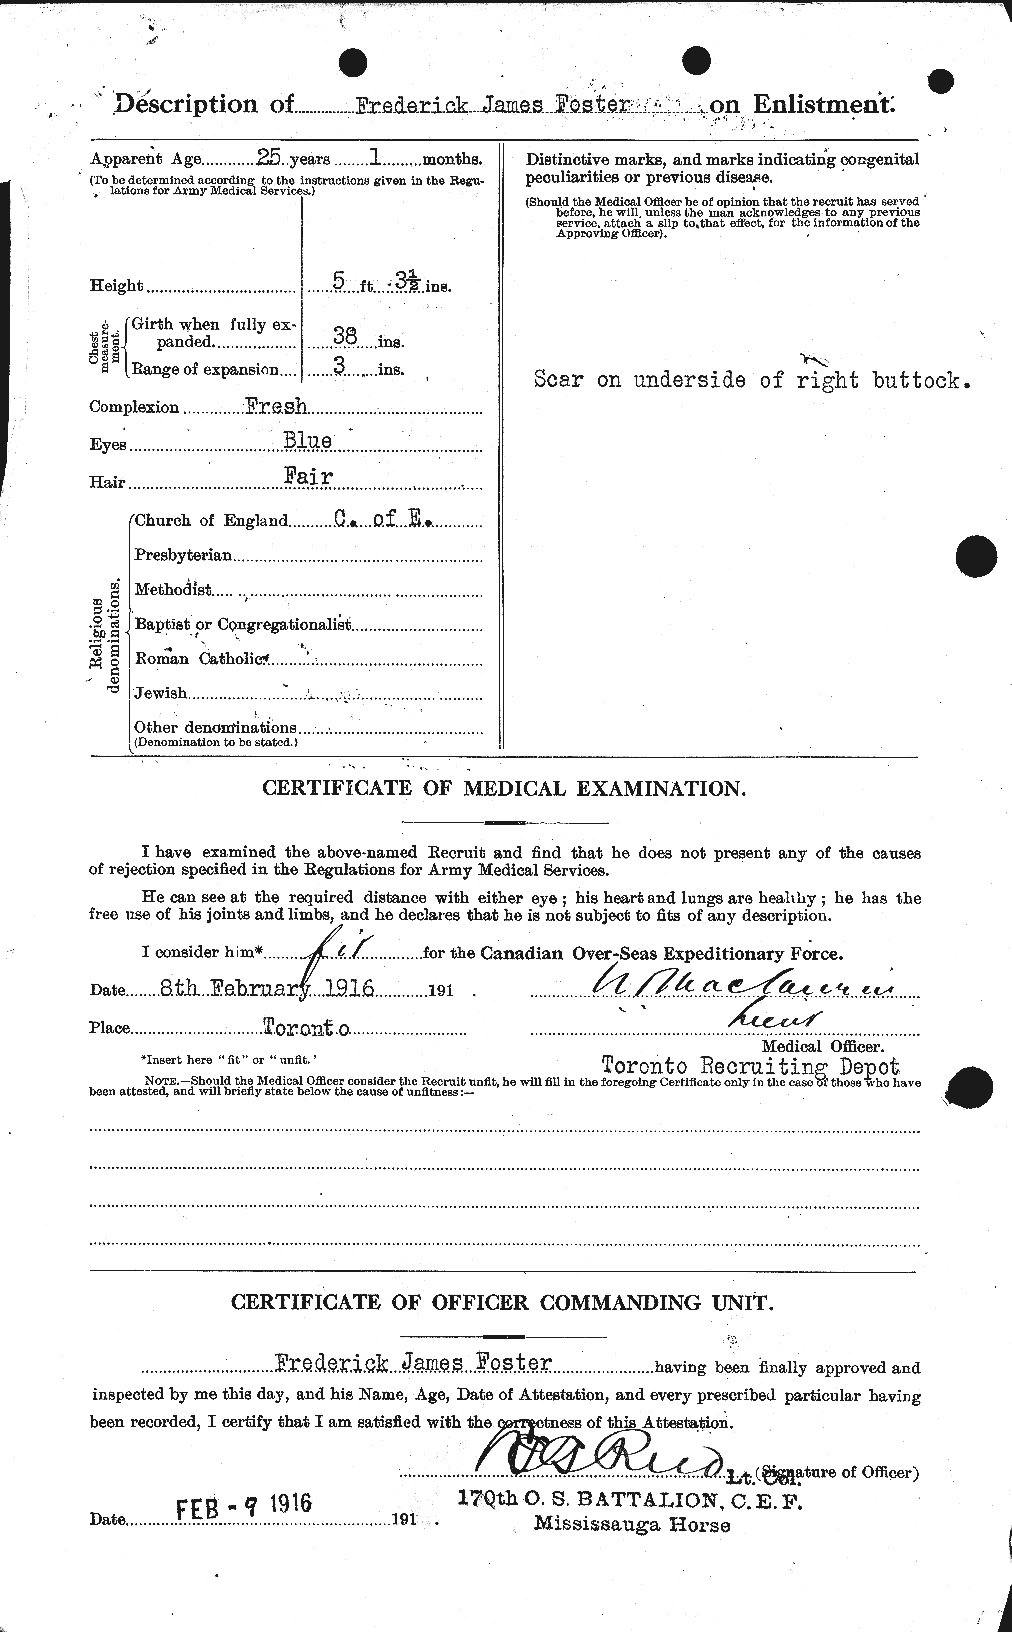 Personnel Records of the First World War - CEF 330653b